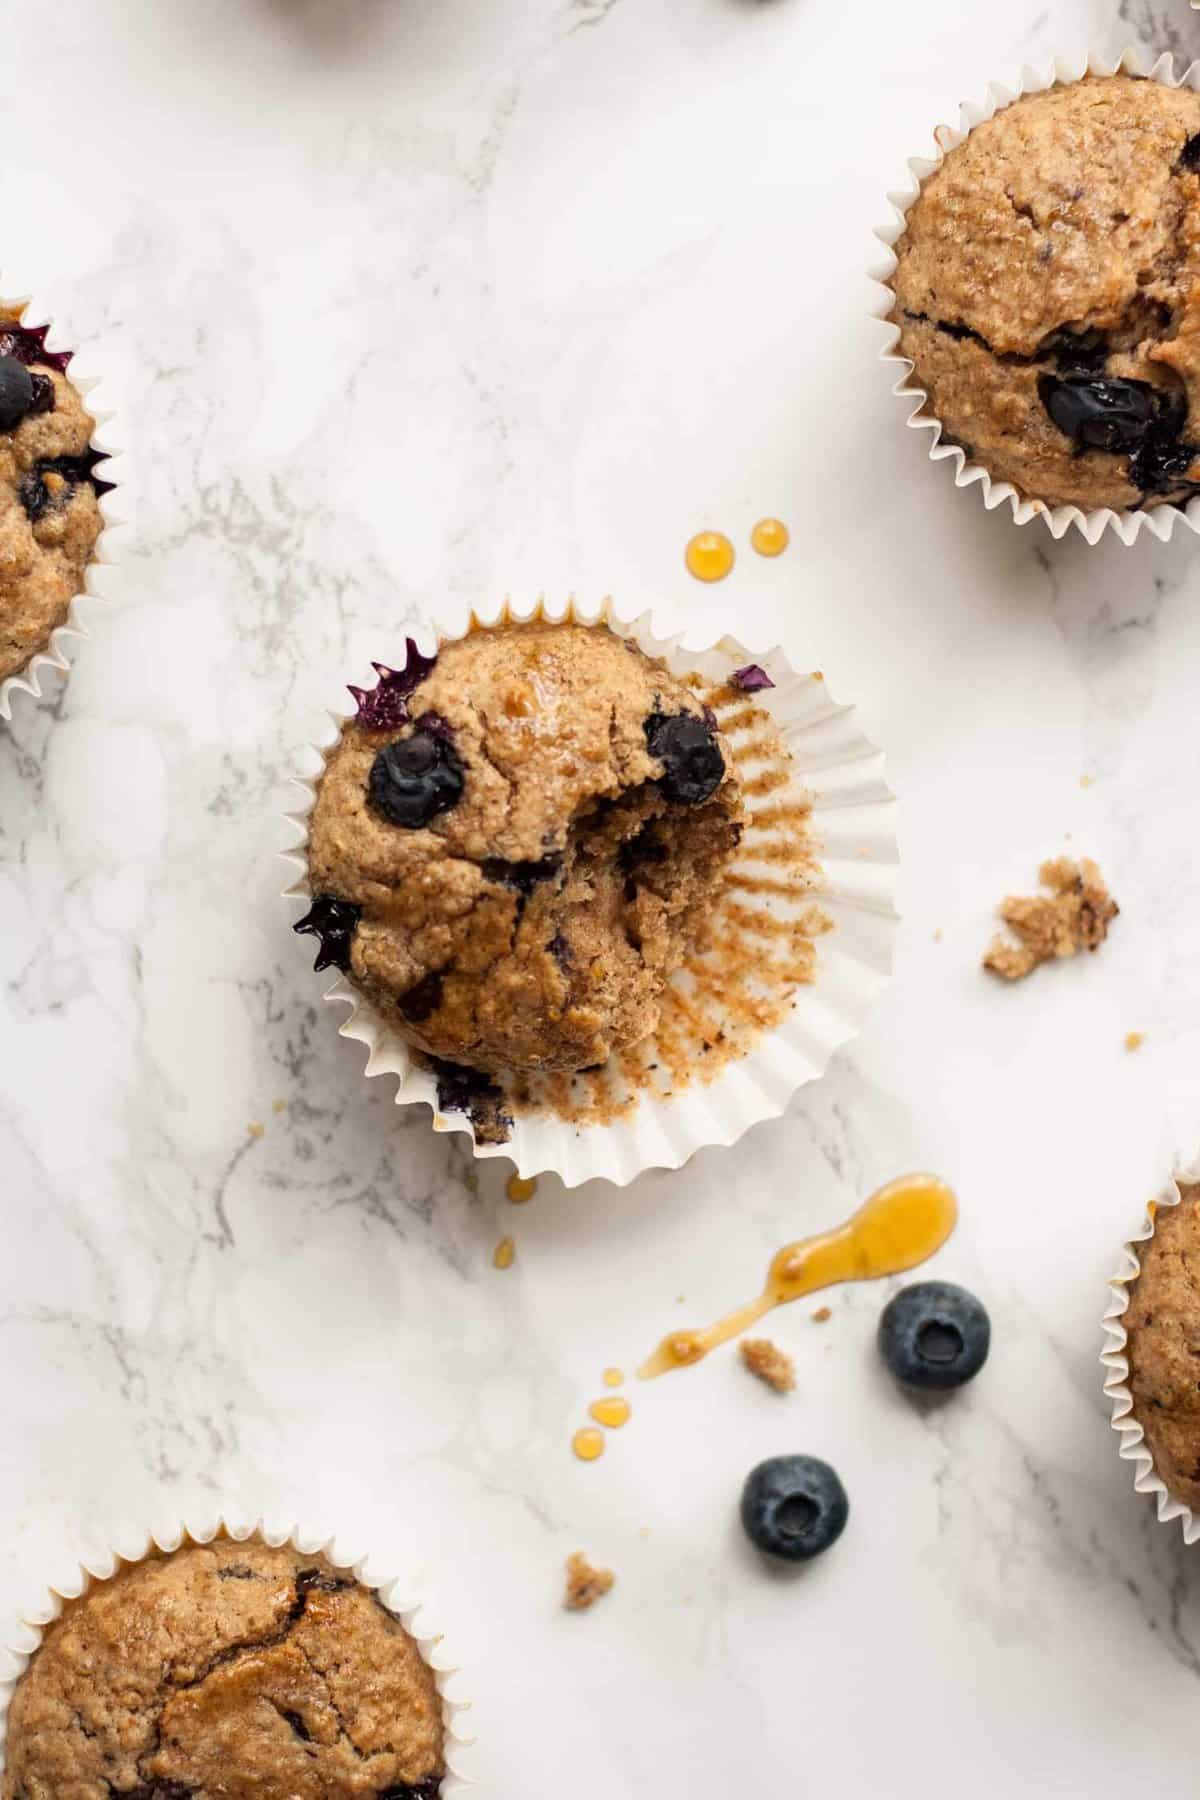 Quinoa Spelt Blueberry Breakfast Muffins - these easy breakfast muffins are full of goodness and taste amazing with a drizzle of warmed maple syrup! | eatloveeats.com